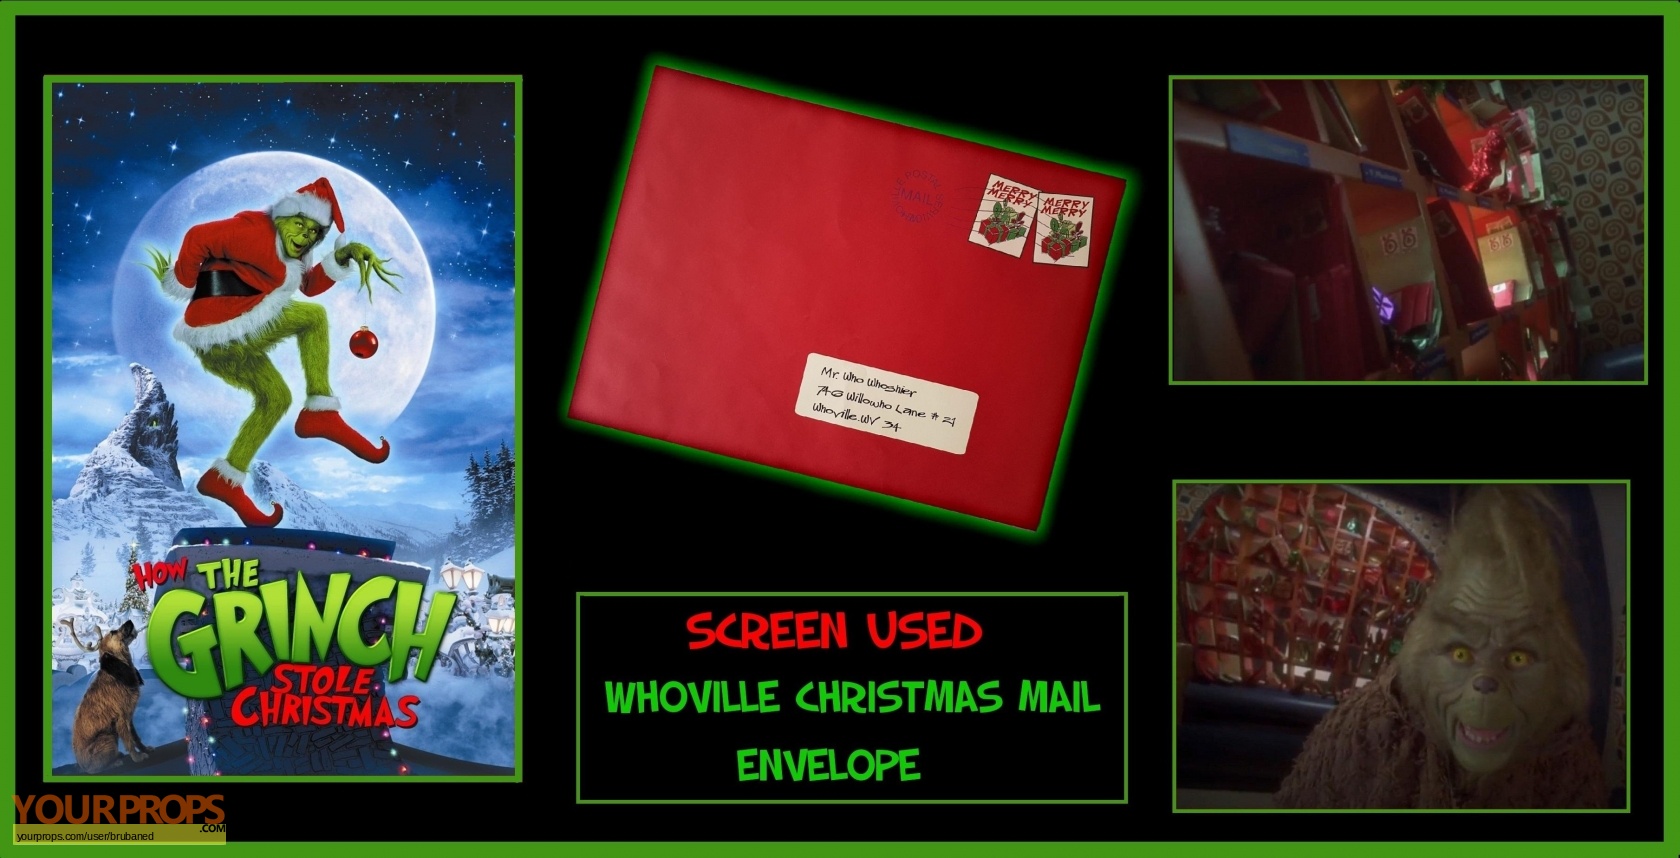 https://www.yourprops.com/movieprops/original/yp5f41b5164c65b9.74251253/How-the-Grinch-Stole-Christmas-Screen-Used-Whoville-Christmas-Envelope-1.jpg